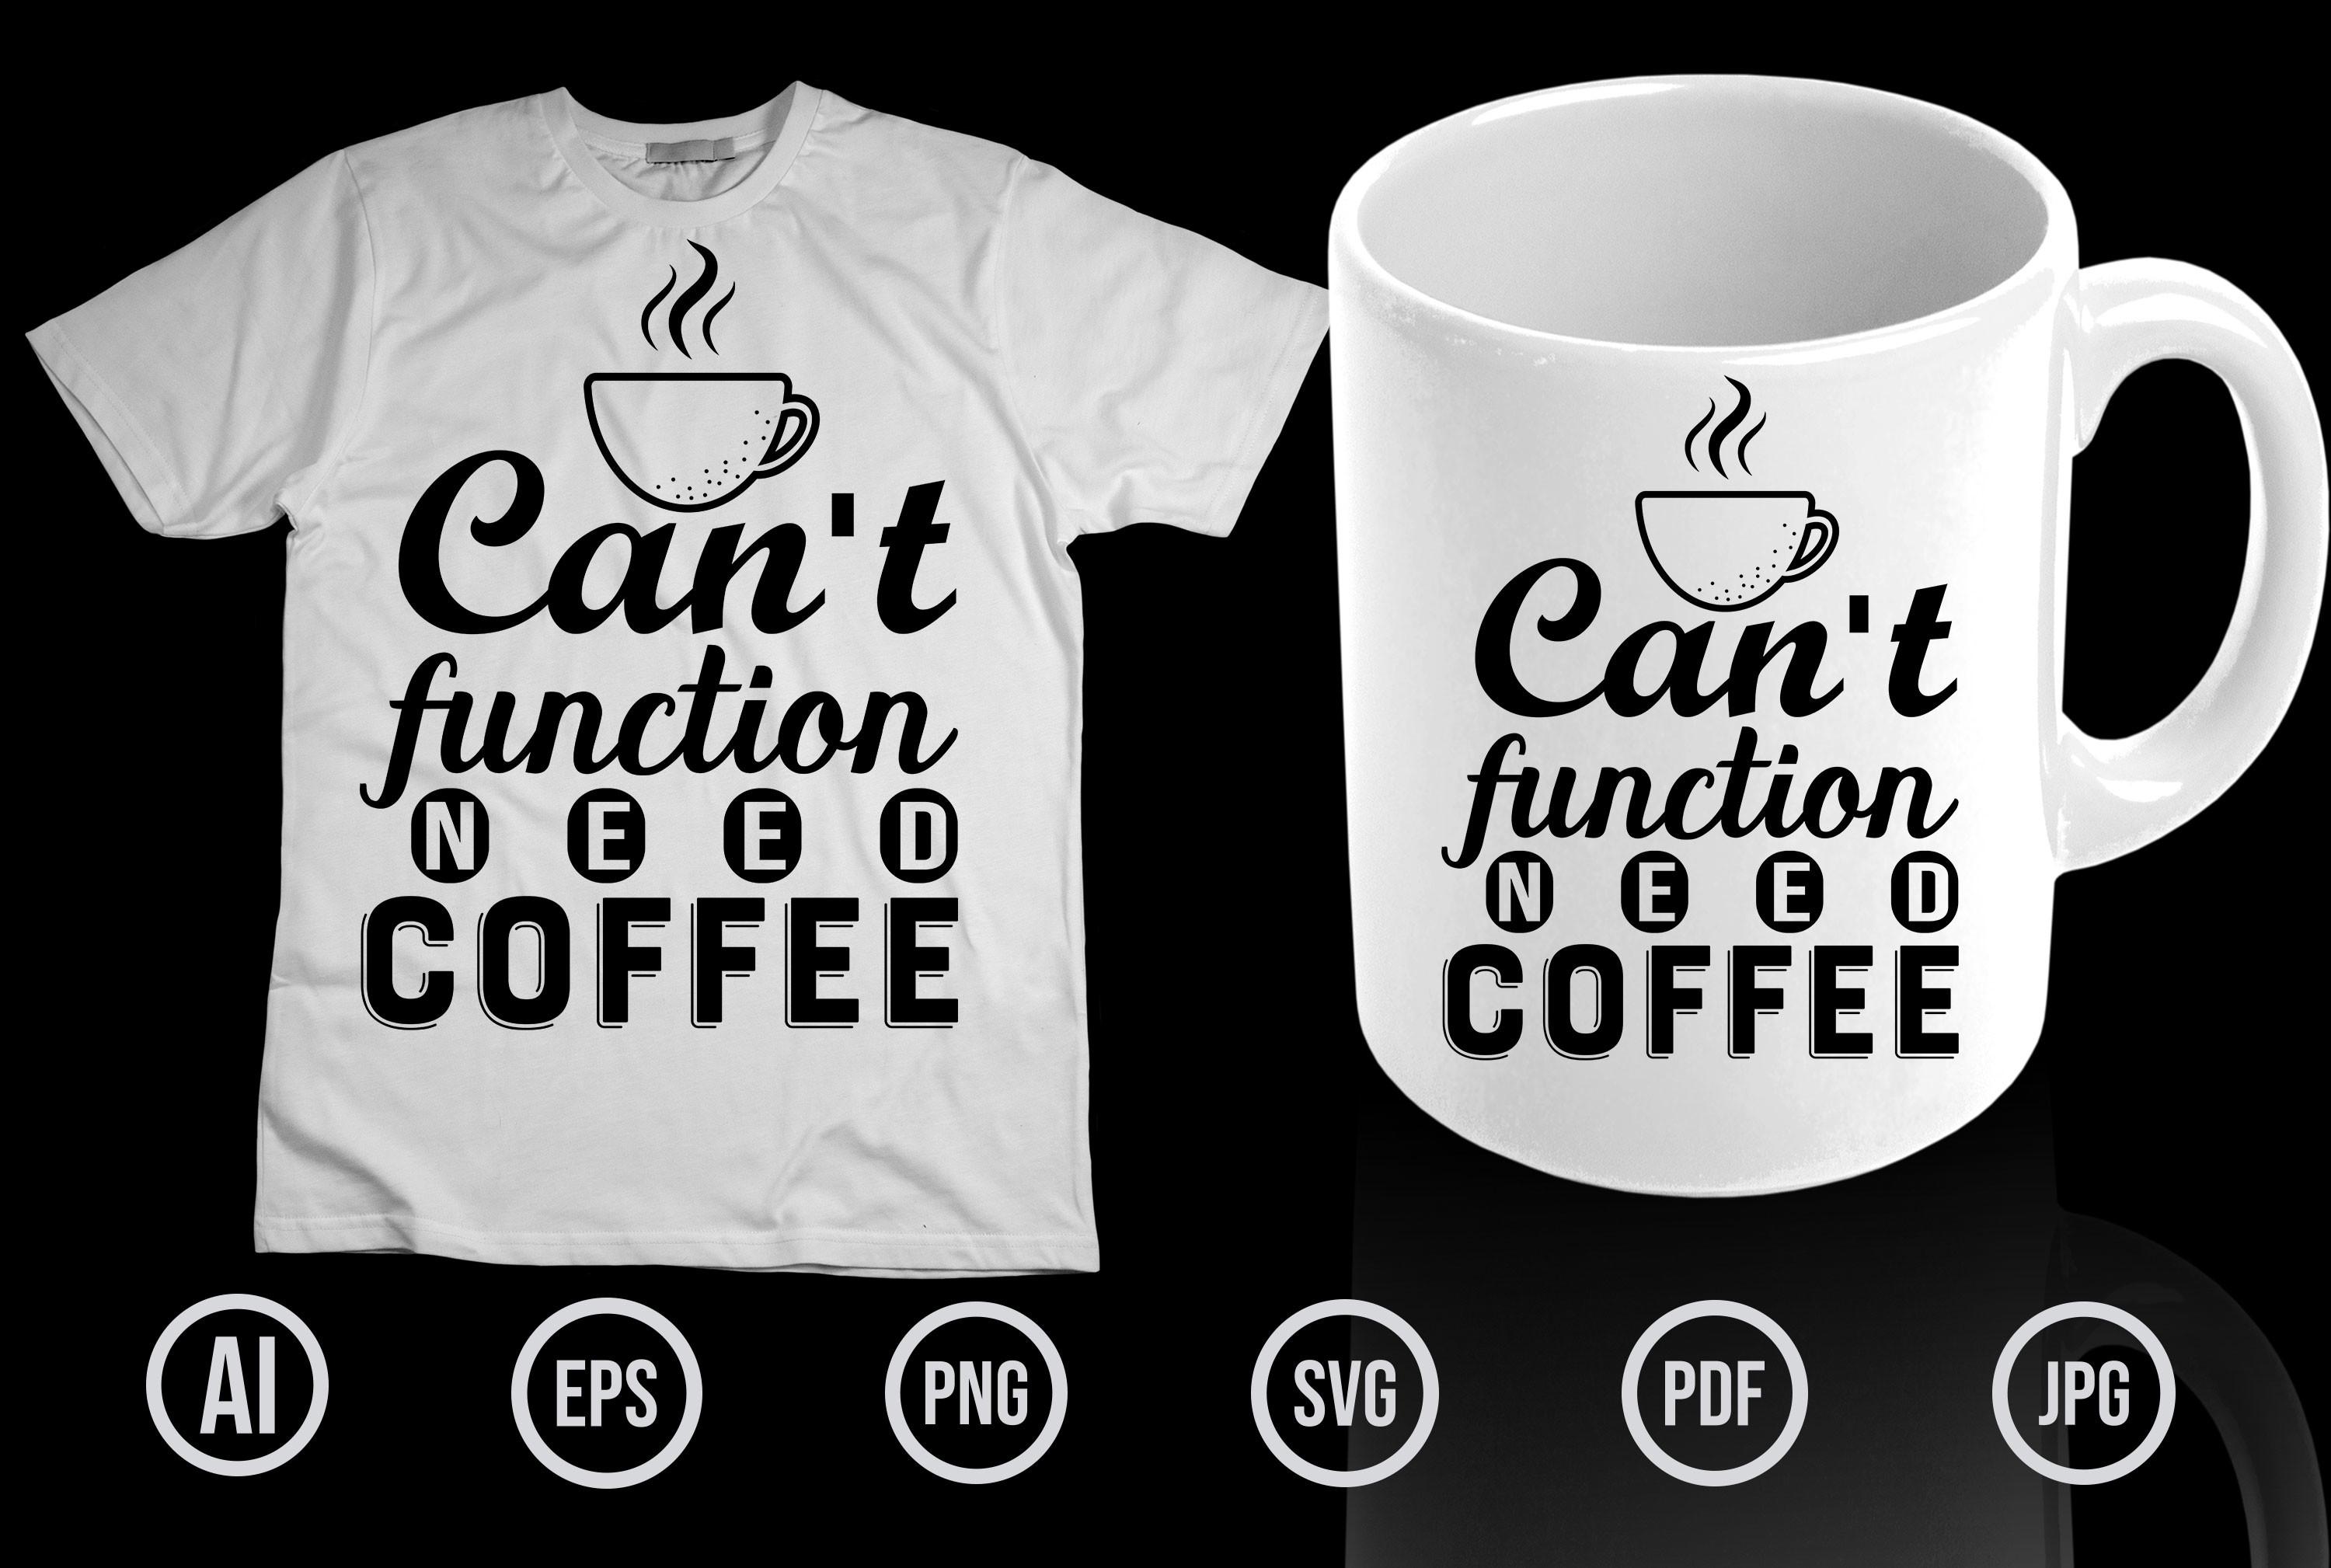 Can't Function Need Coffee T-shirt